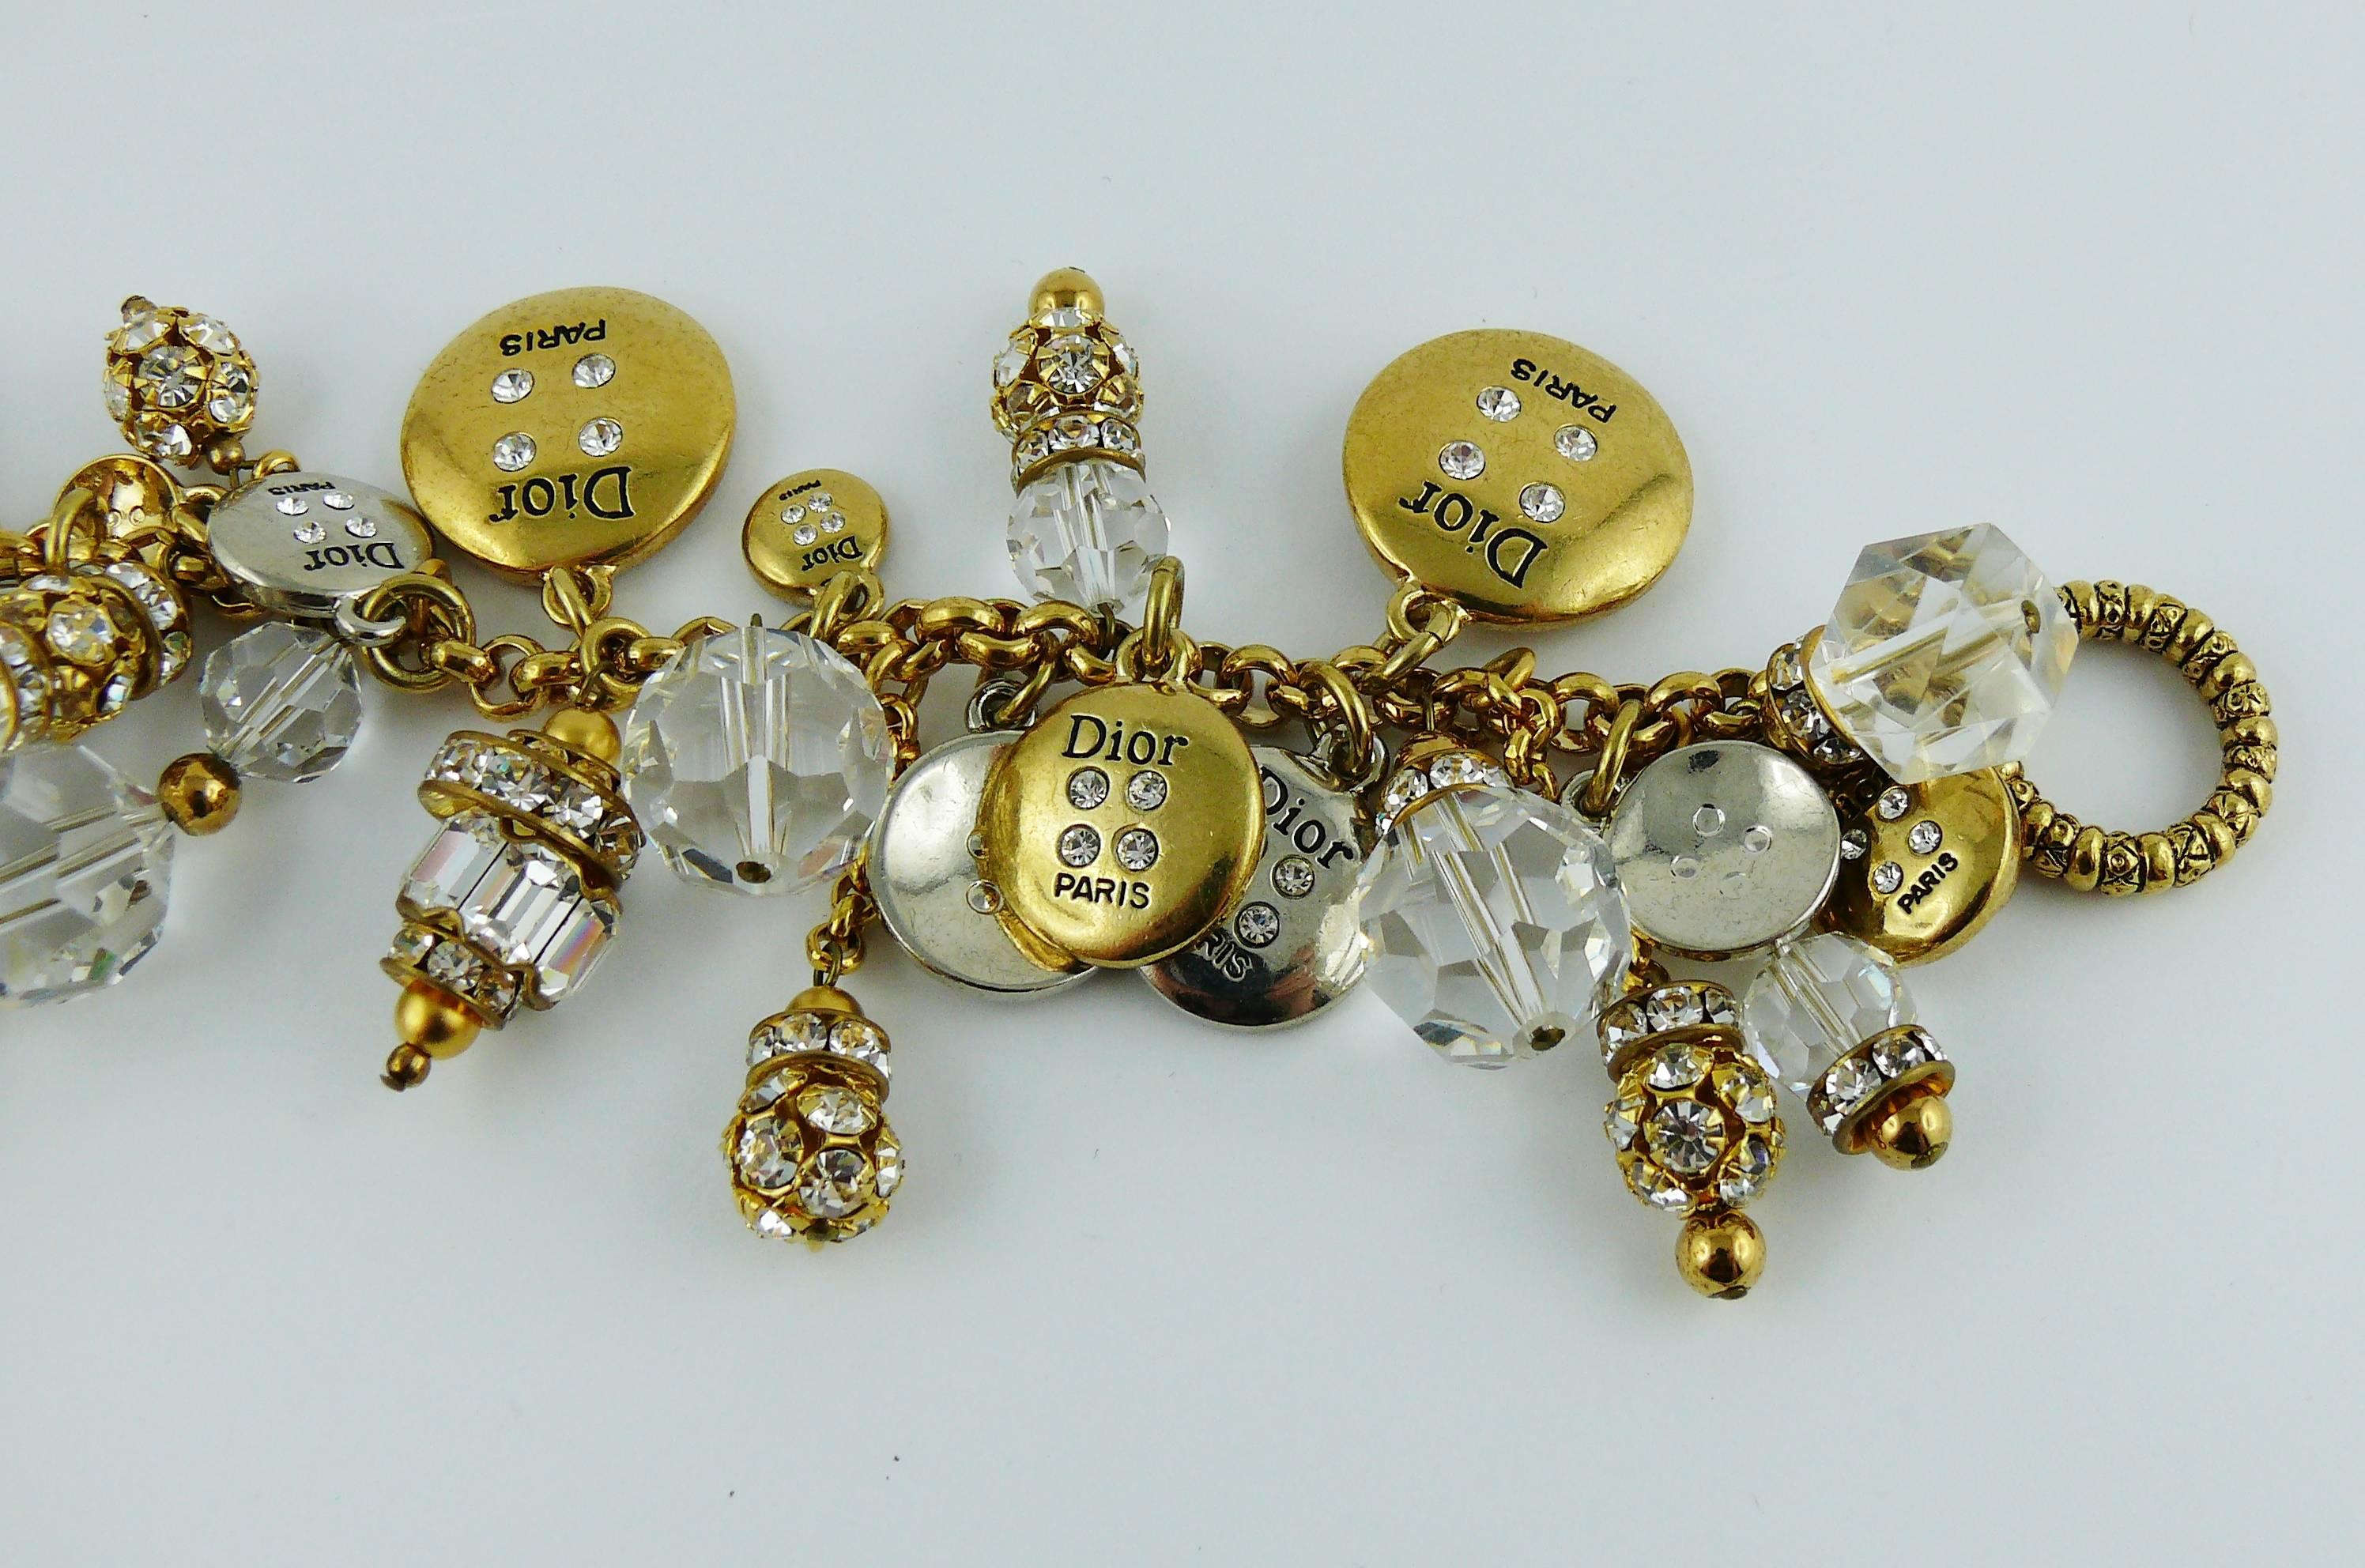 Women's Christian Dior Boutique Vintage Iconic Buttons and Jewelled Charms Bracelet